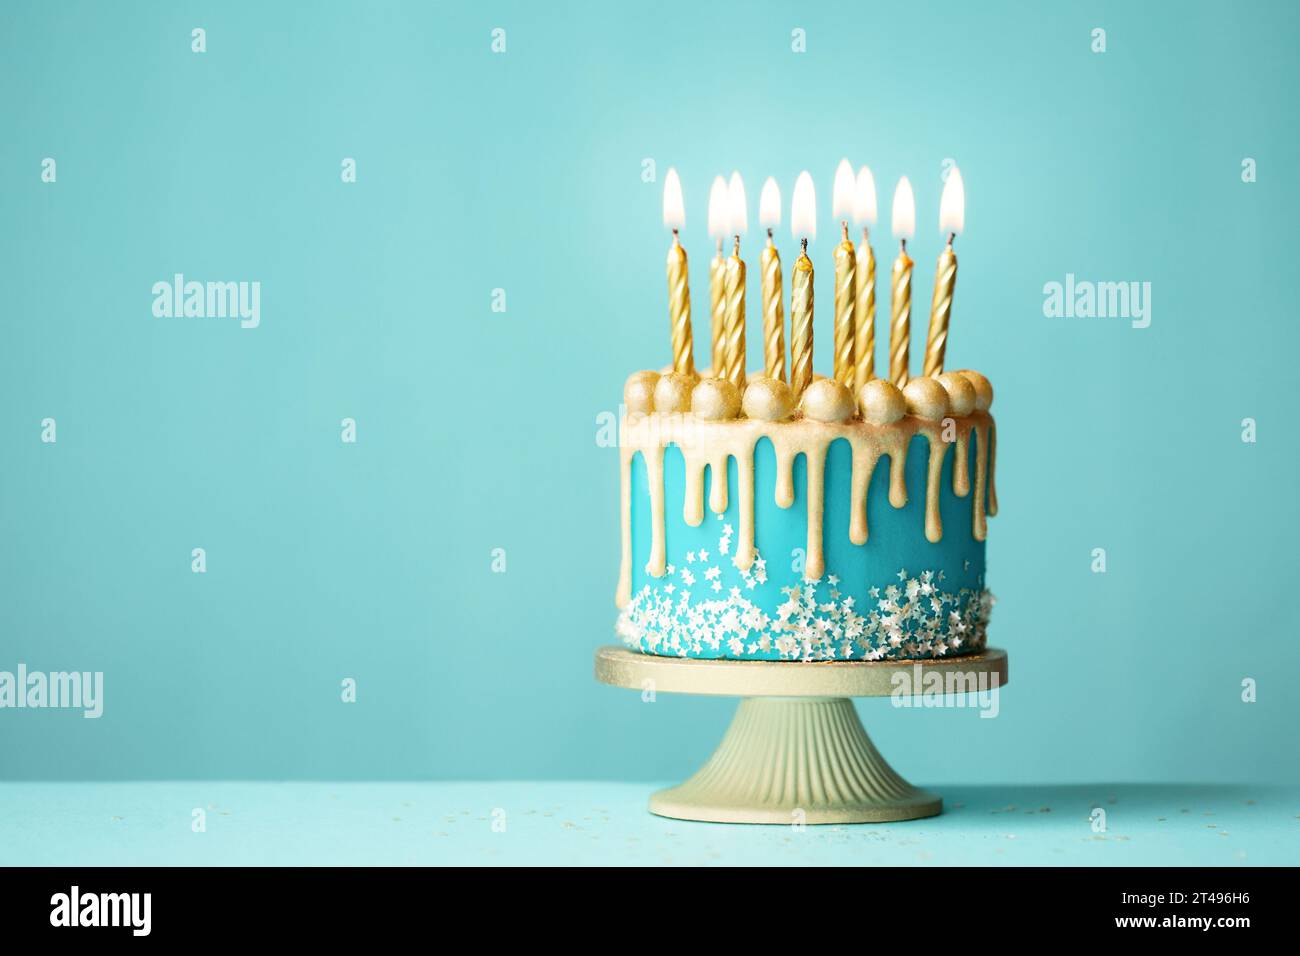 Elegant turquoise birthday cake with gold drip icing and gold birthday candles against a turquoise background Stock Photo